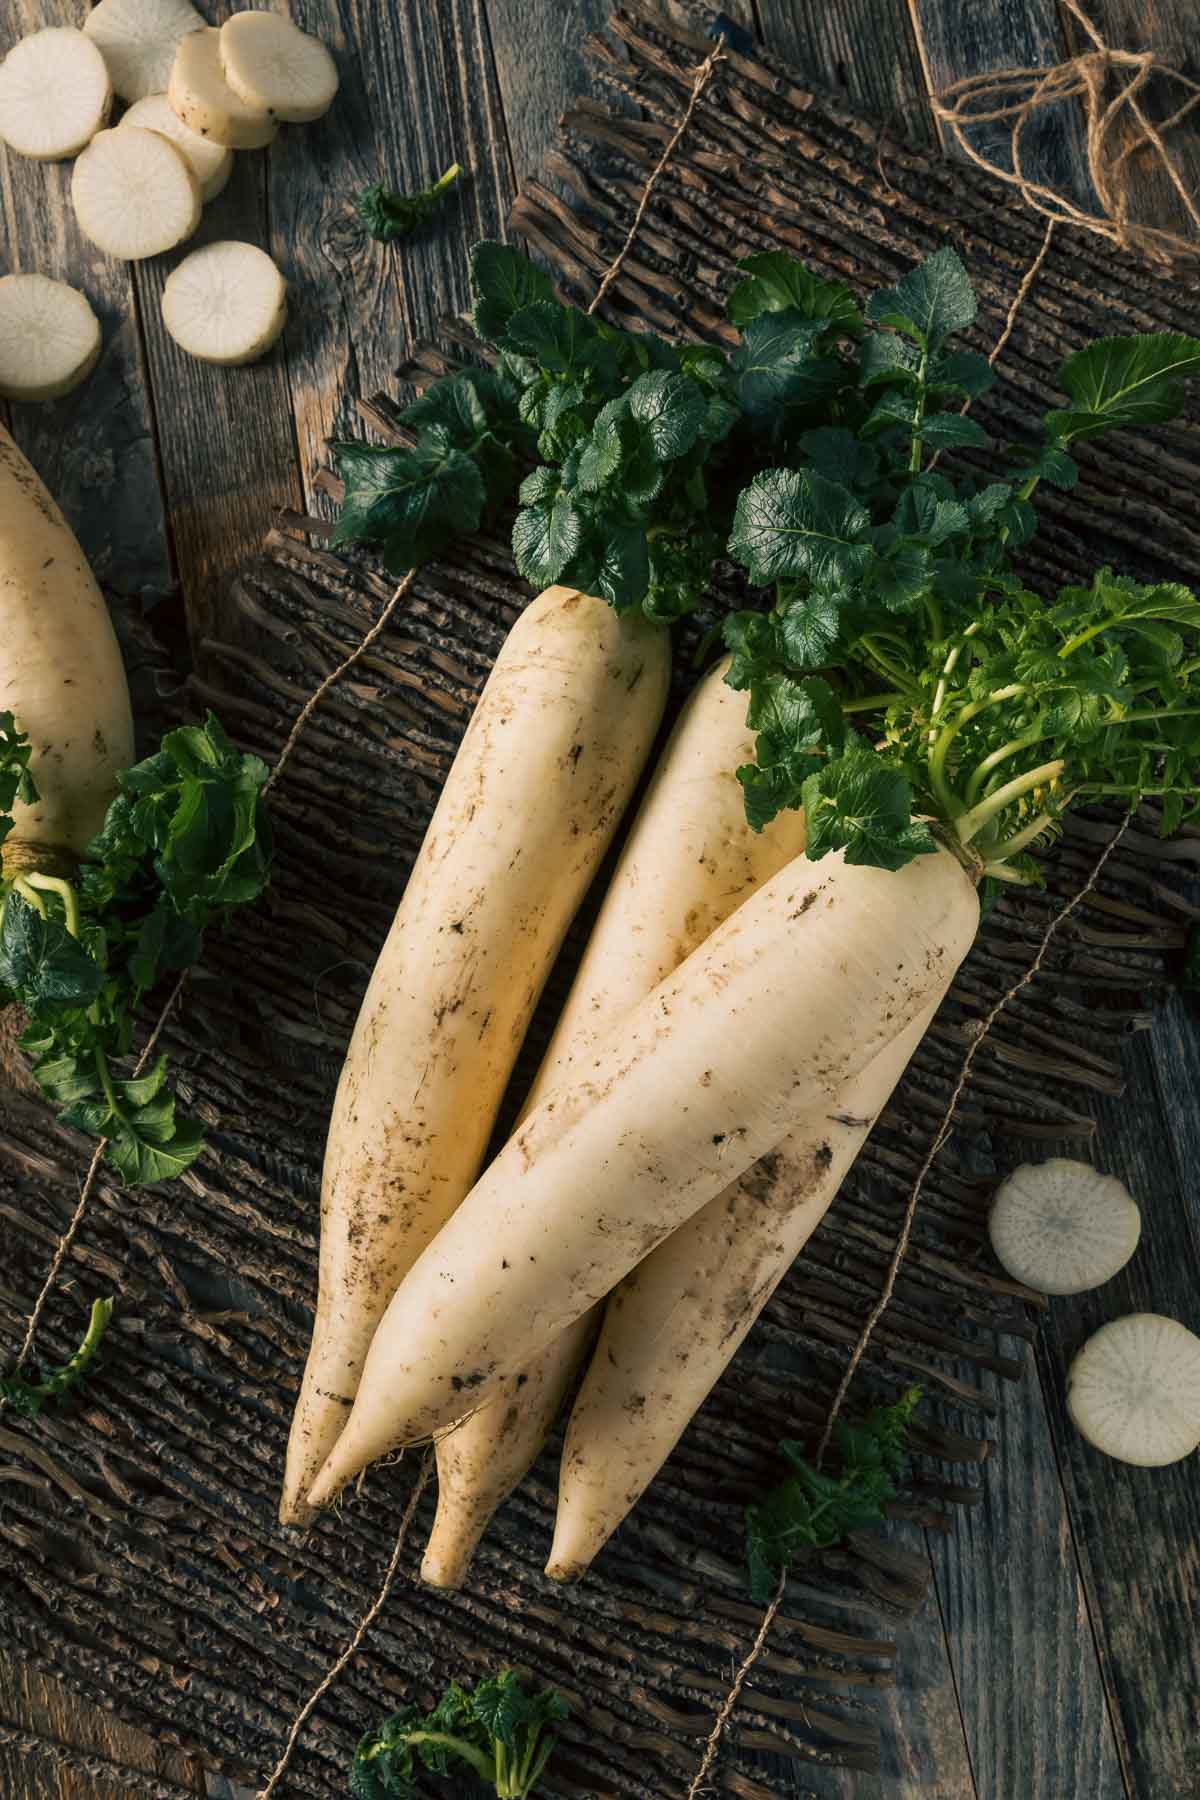 A pile of four thick, white daikon radish that can be used as a cover crop.